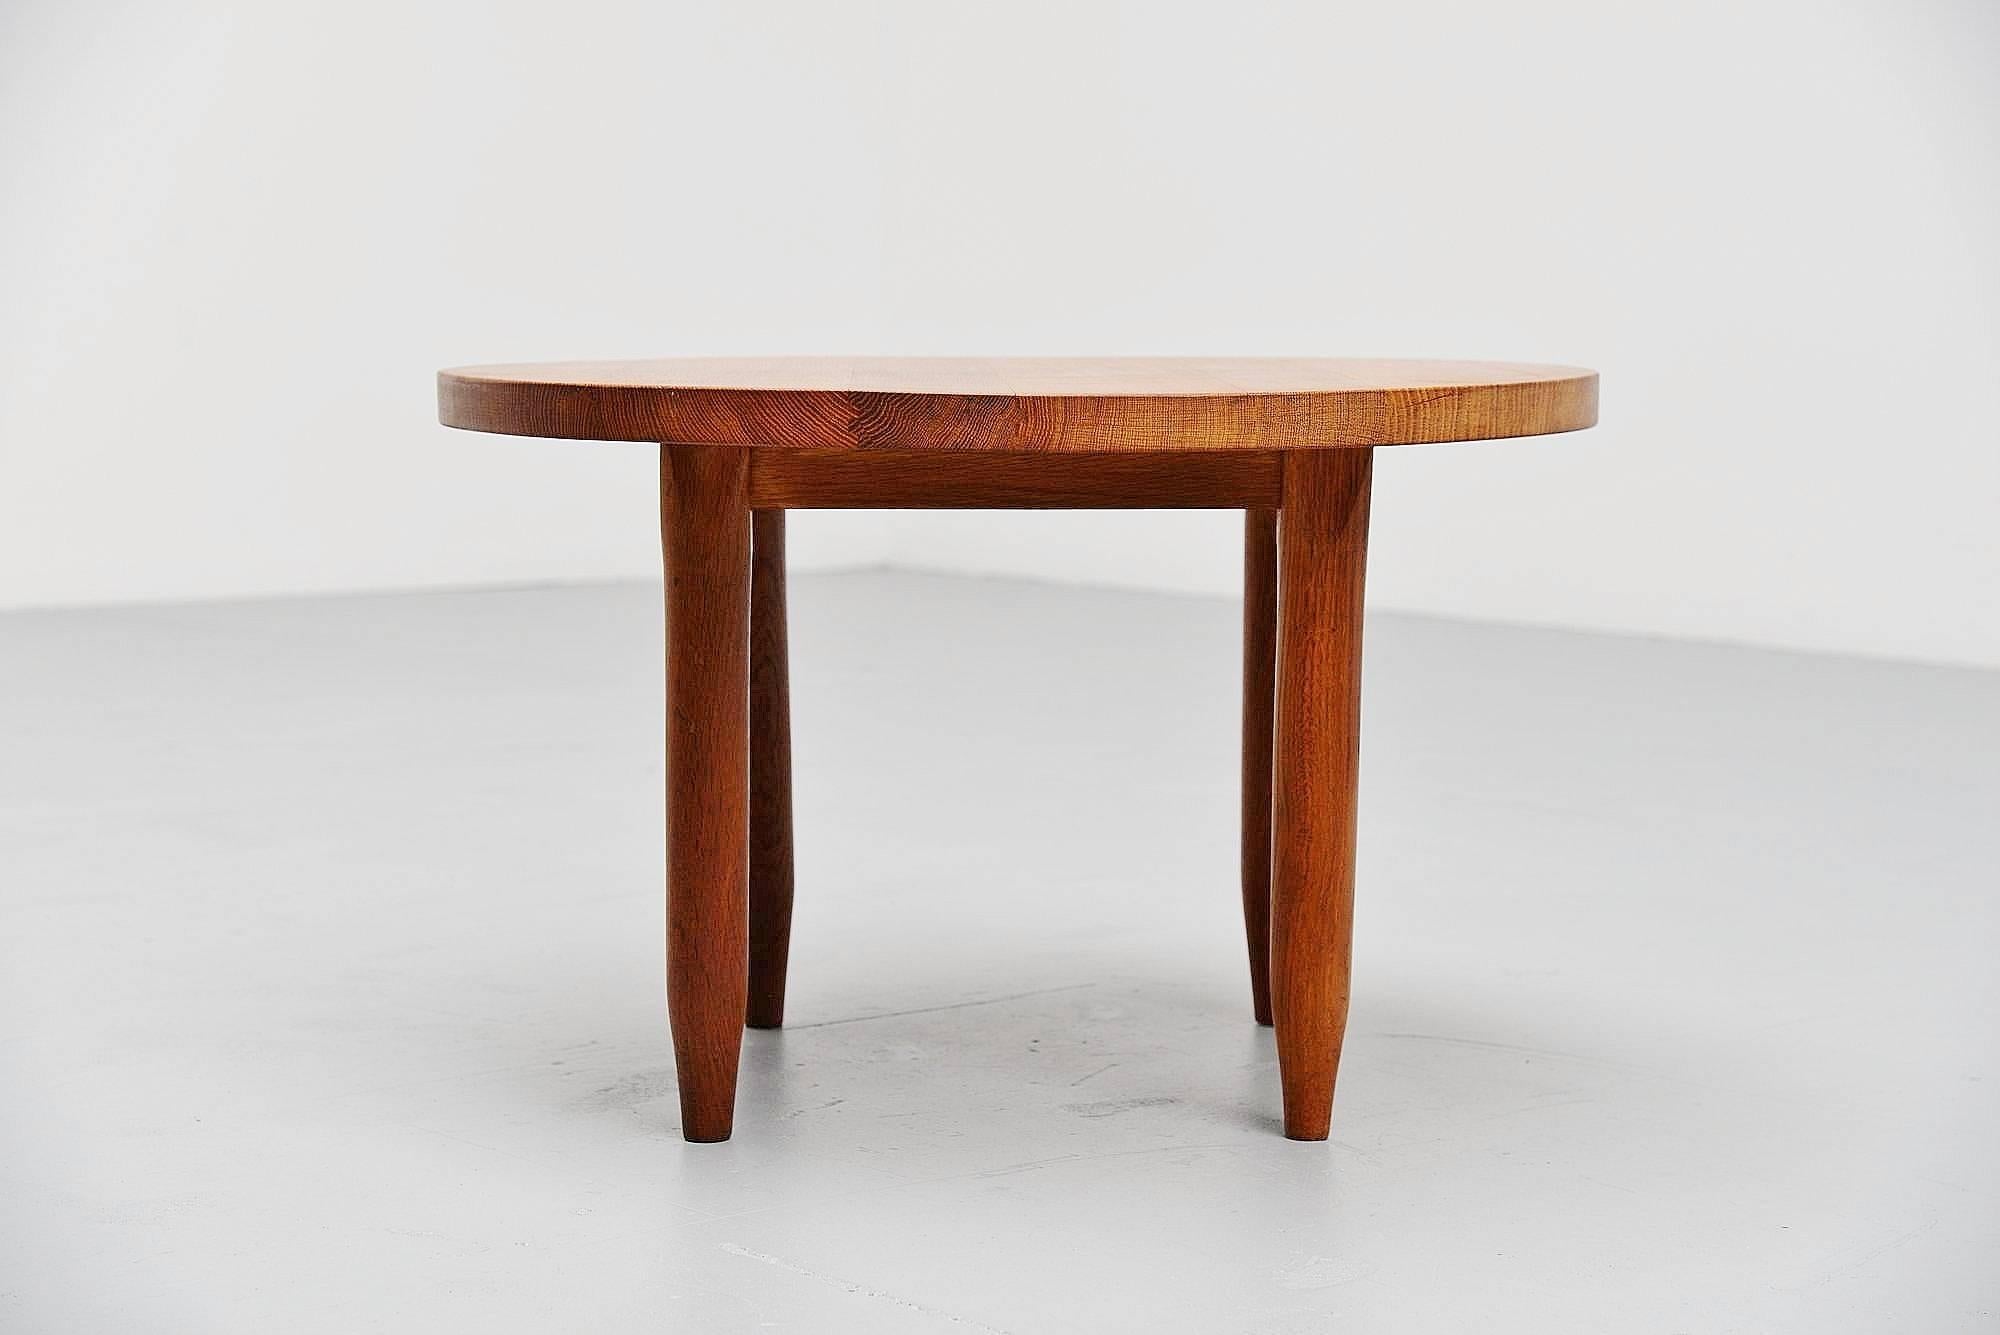 Very nice Forme Libre coffee table in the style of Charlotte Perriand and Pierre Chapo, France, 1950. This solid oak coffee table was bought just along the French border and has very nice details if you have a good look. Close to the works of